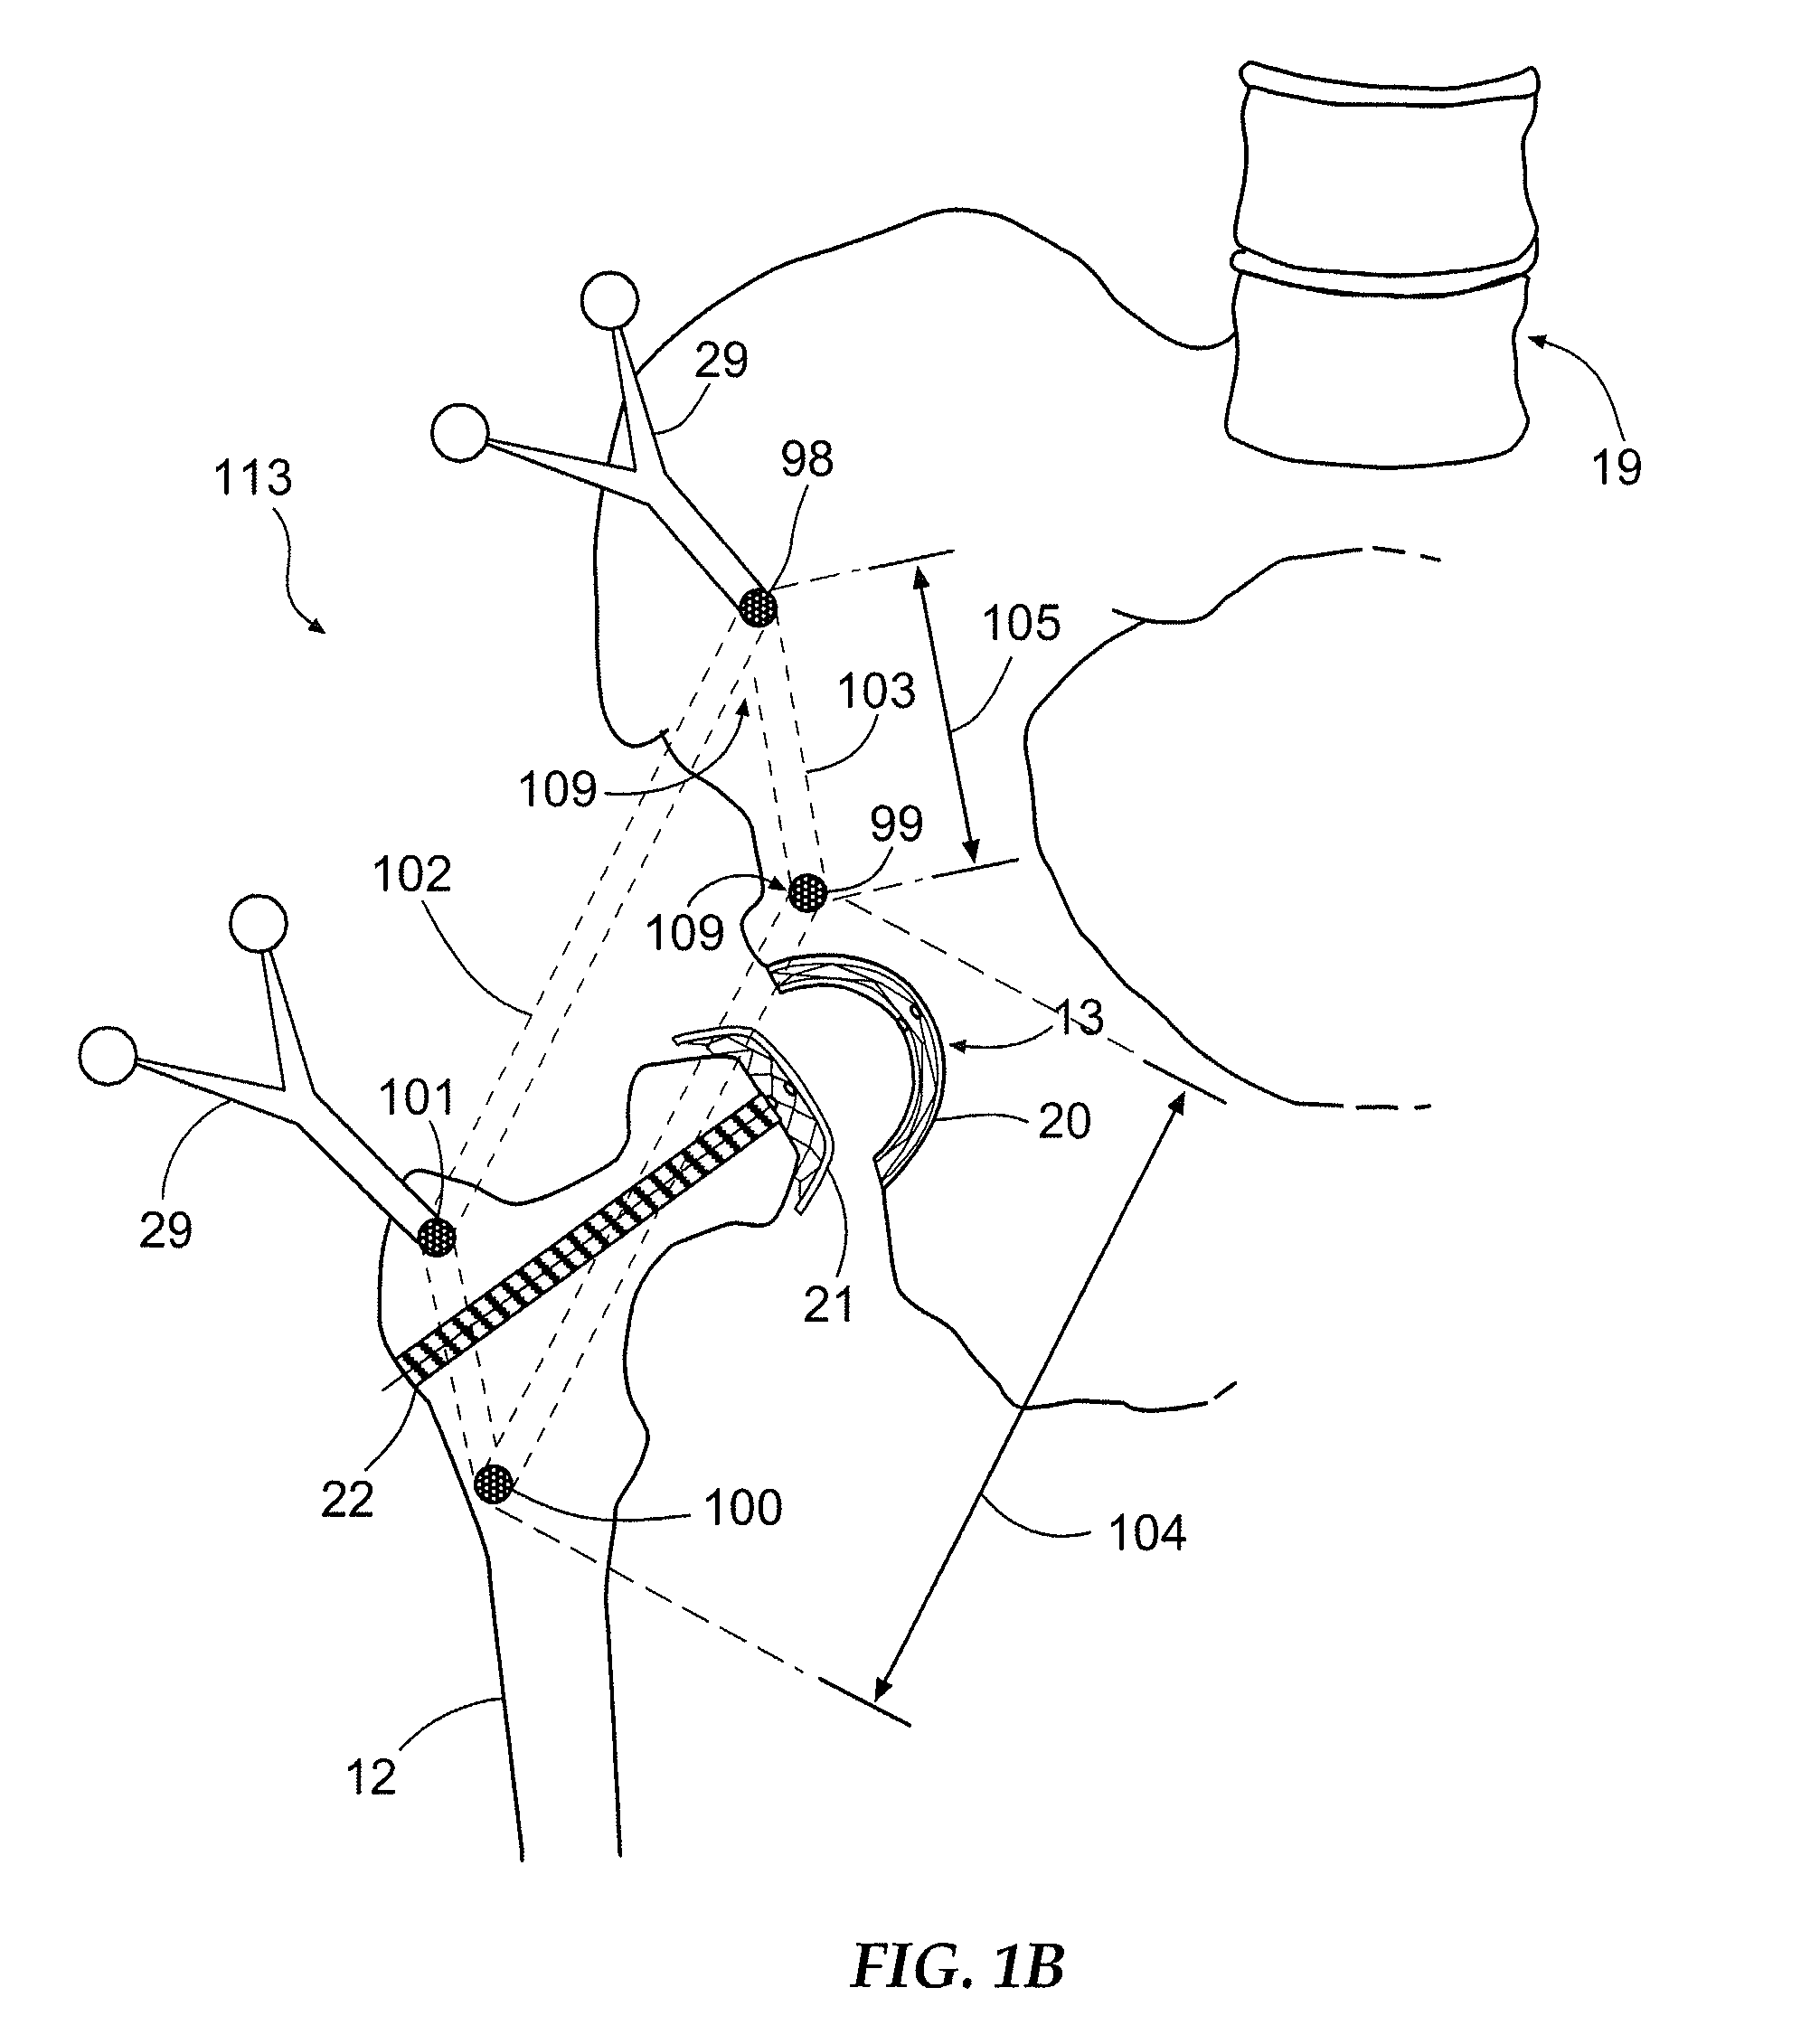 Method and Apparatus for Arthroscopic Assisted Arthroplasty of the Hip Joint